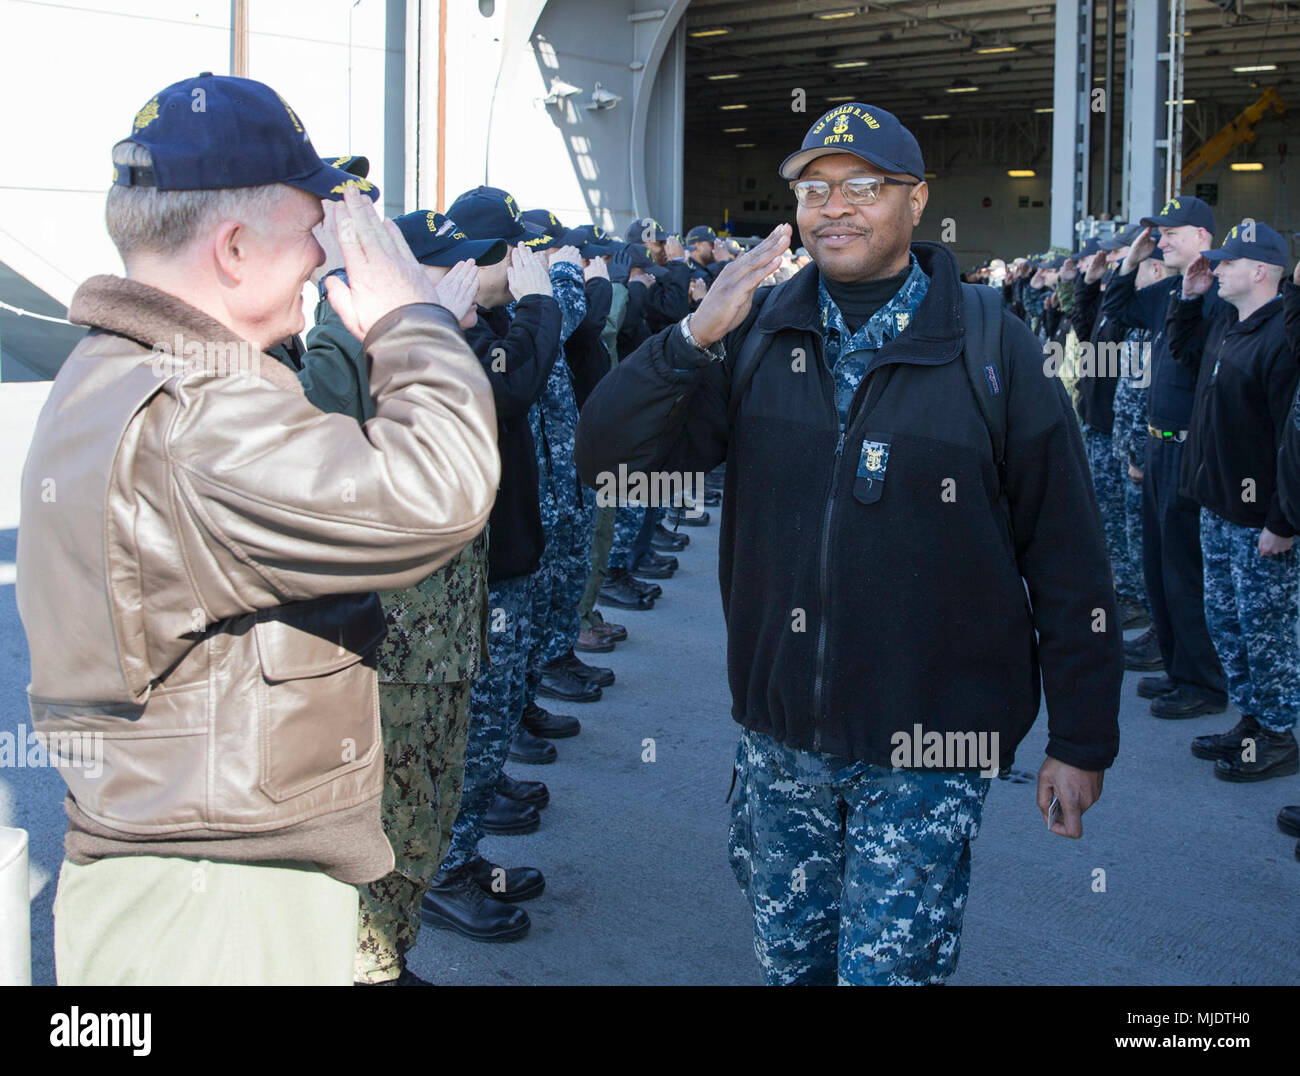 NORFOLK, Va. (Mar. 23, 2018) -- Master Chief Aviation Boatswain's Mate Kemmy Frazier returns the salute of Capt. Richard McCormack, USS Gerald R. Ford's (CVN 78) commanding officer, as he departs the command. (U.S. Navy Stock Photo